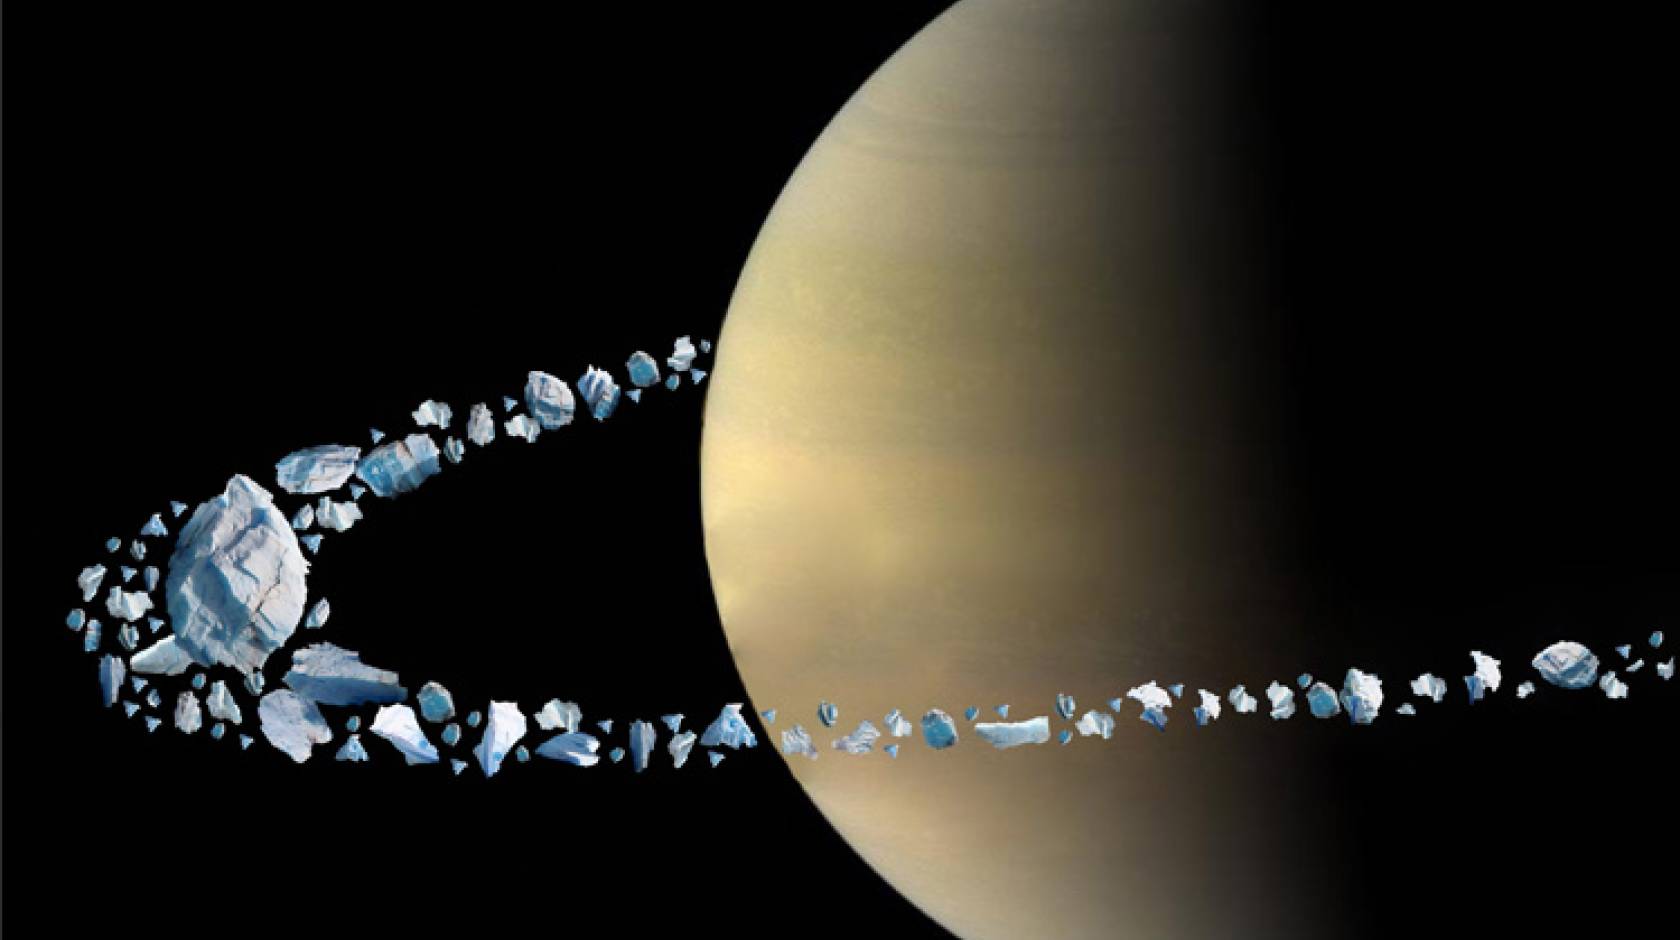 A new ring system discovered in our solar system